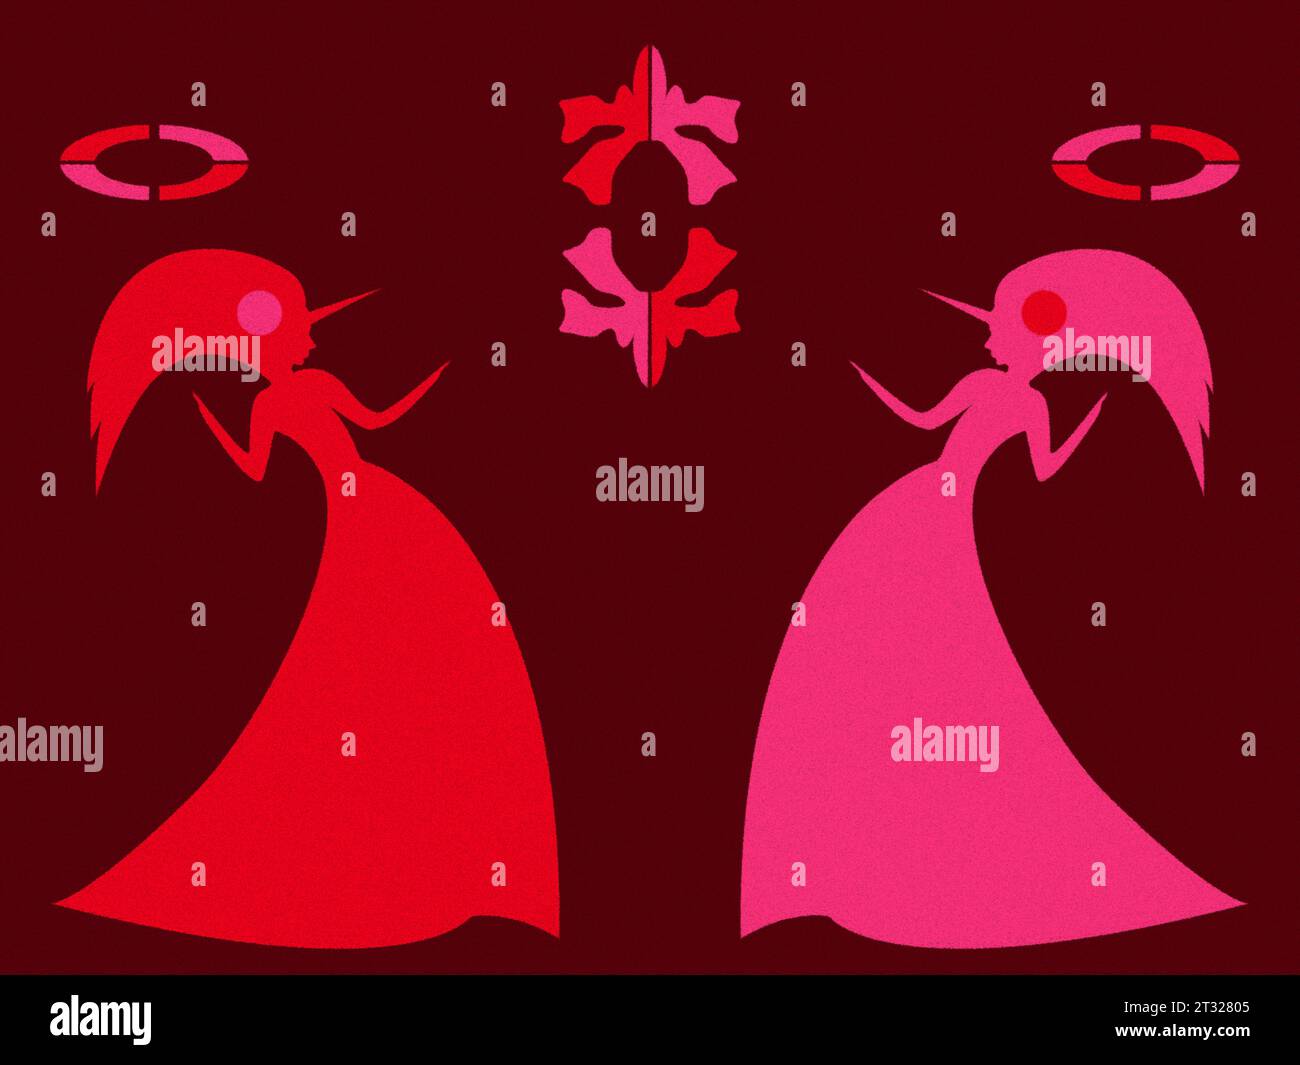 Pair Unicorn Women with symbol and accessories as a concept of unity and struggle opposites, stylized silhouettes, illustration mainly in red and pink Stock Photo